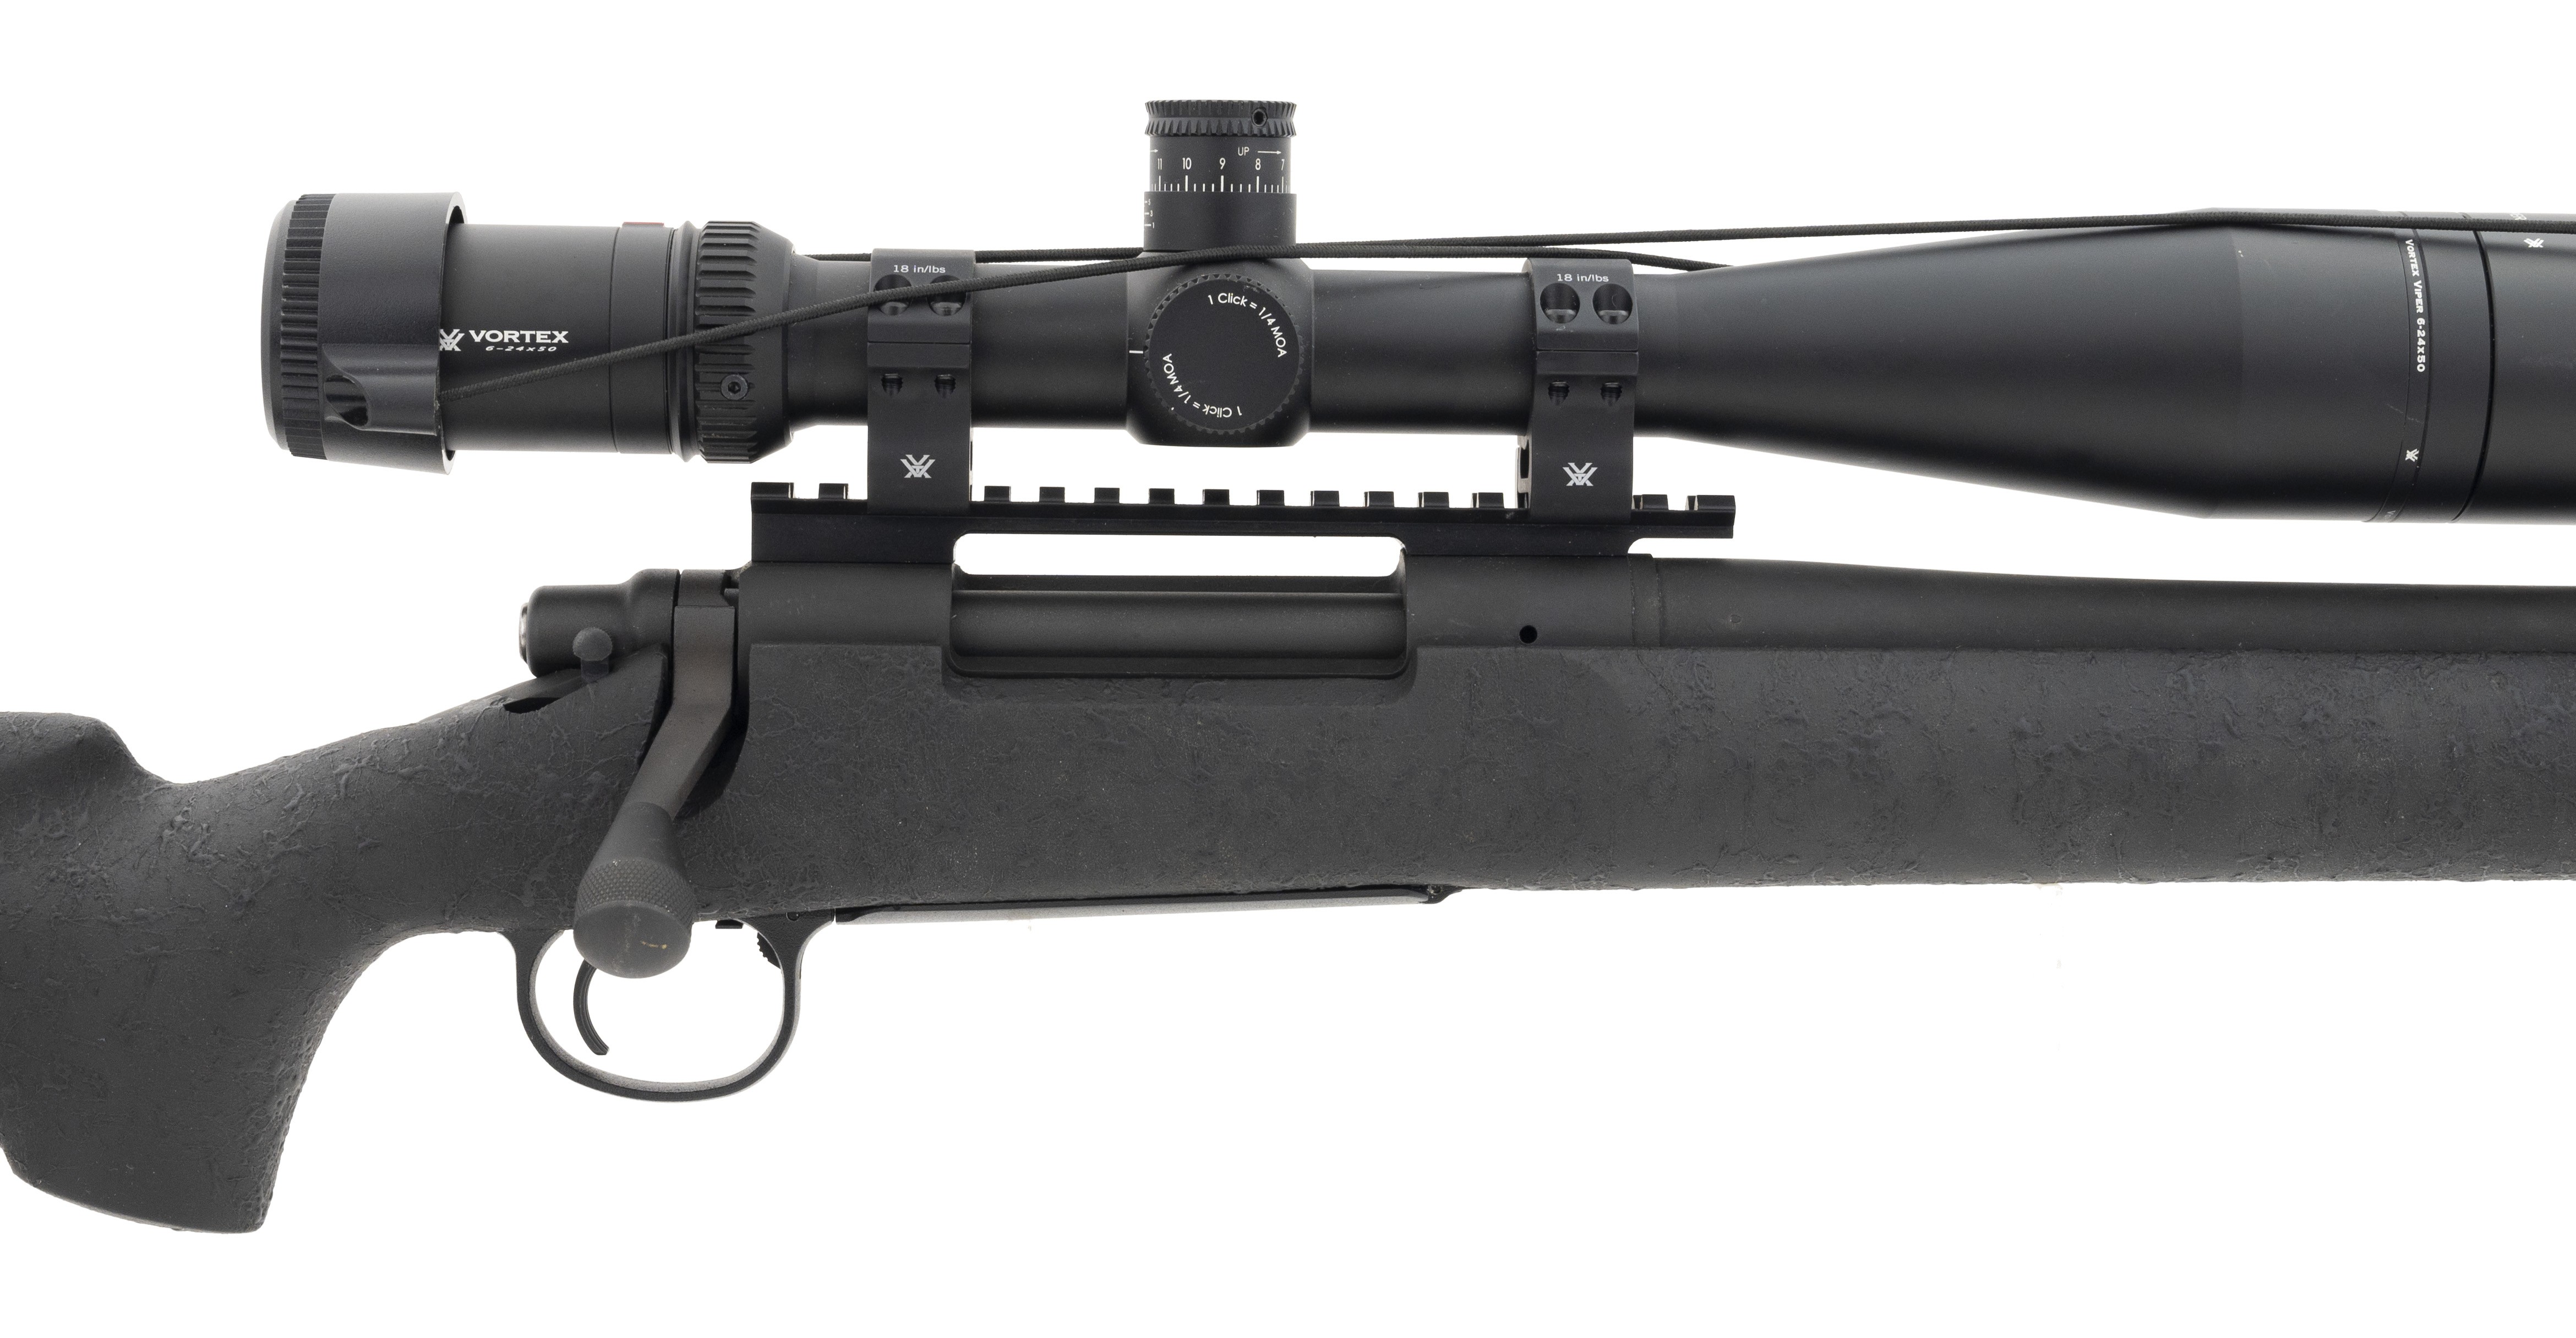 Remington 700 Price - How do you Price a Switches?